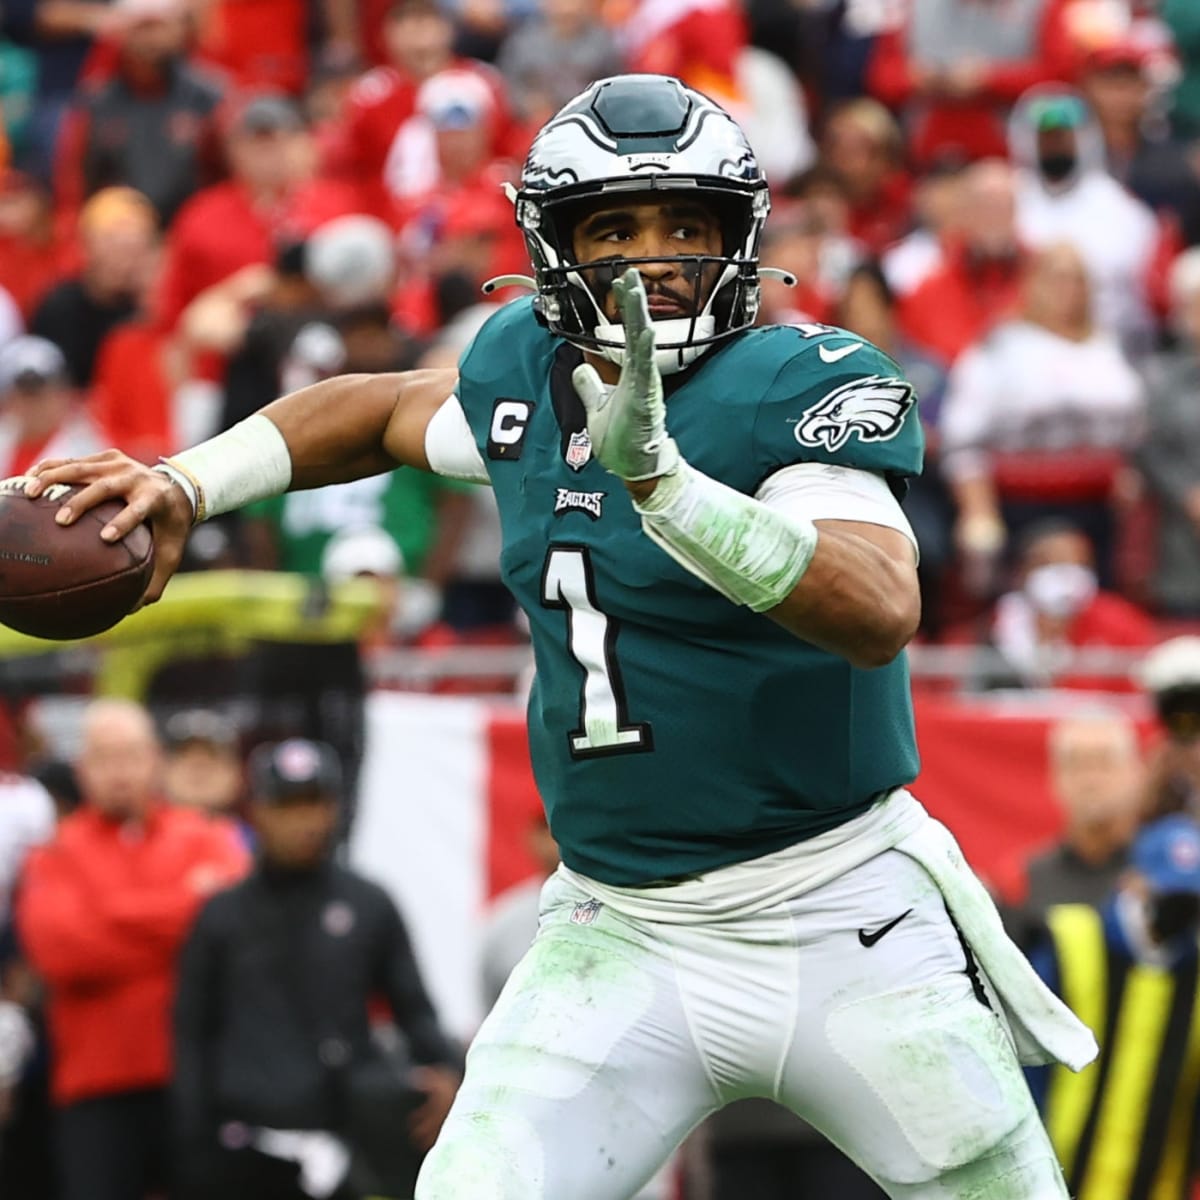 How to Same Game Parlay for Buccaneers vs. Eagles